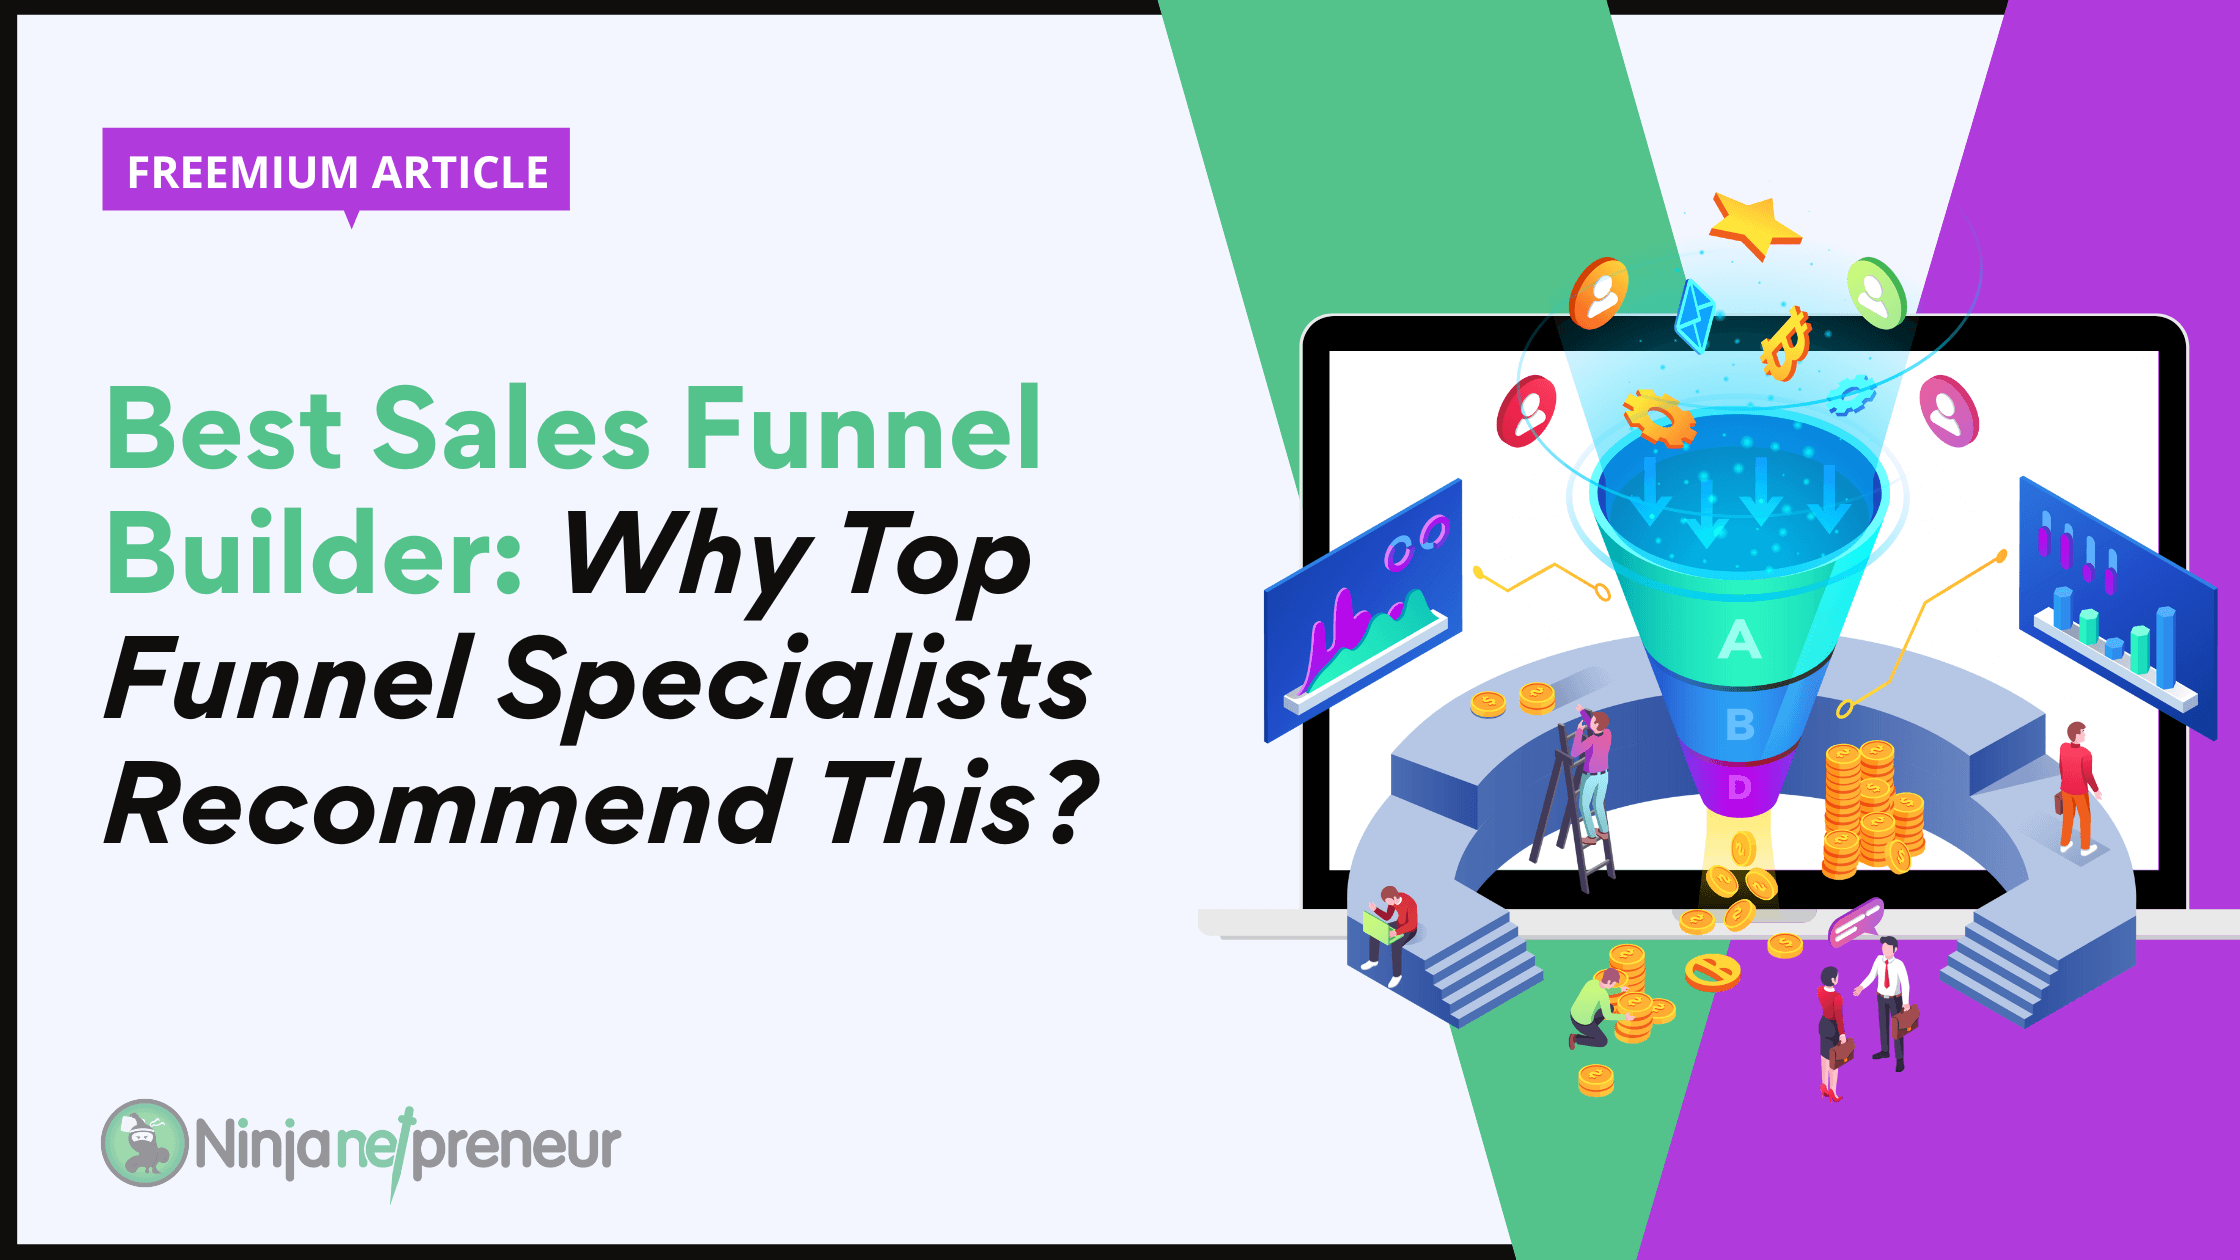 Best Sales Funnel Builder Why Top Funnel Specialists Recommend Systeme